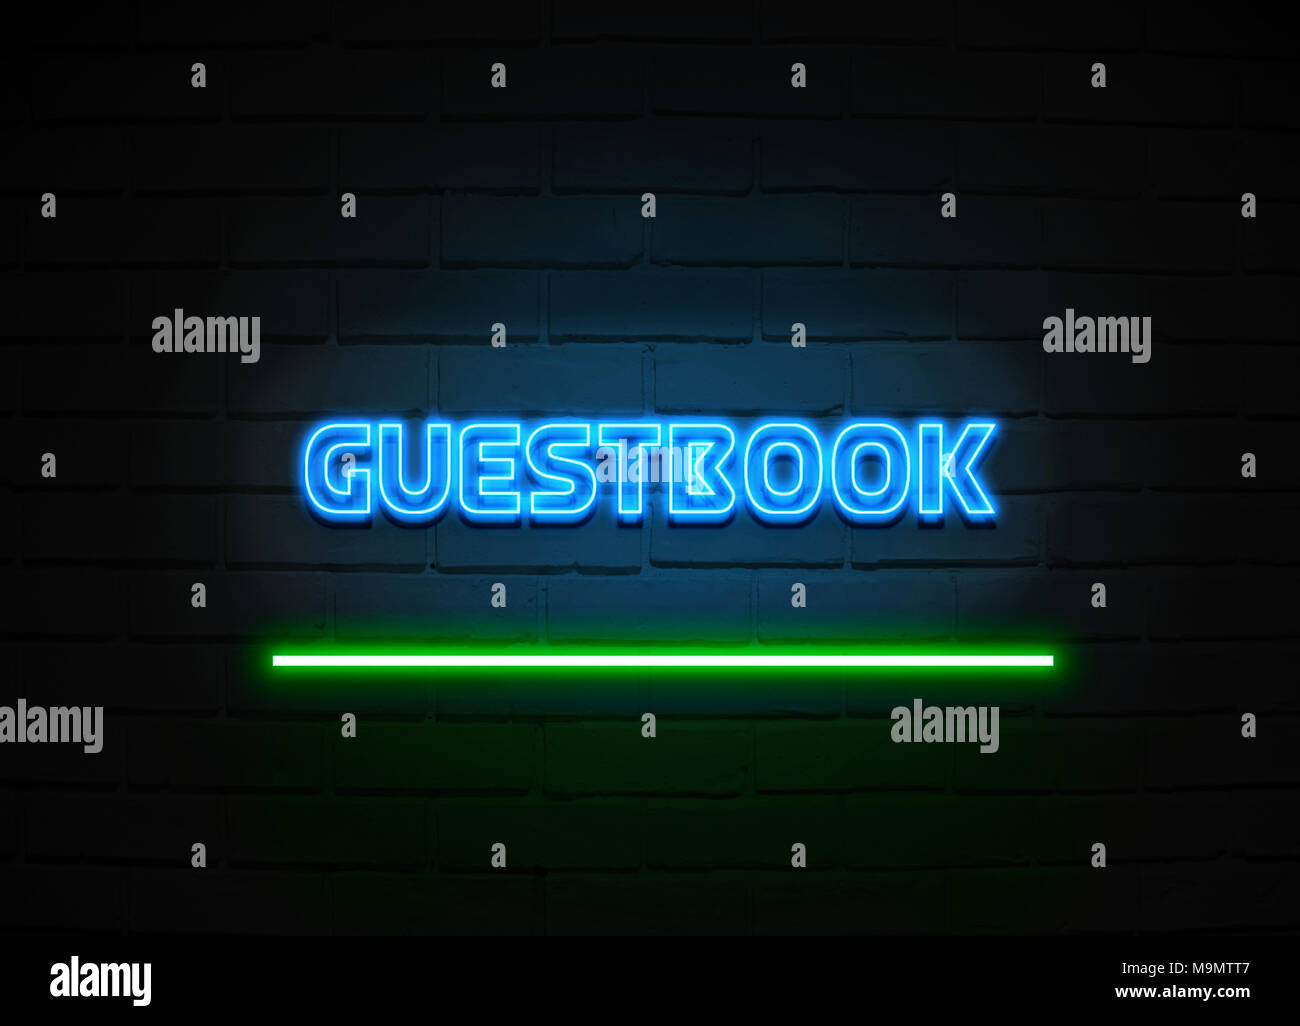 Guestbook neon sign - Glowing Neon Sign on brickwall wall - 3D rendered royalty free stock illustration. Stock Photo